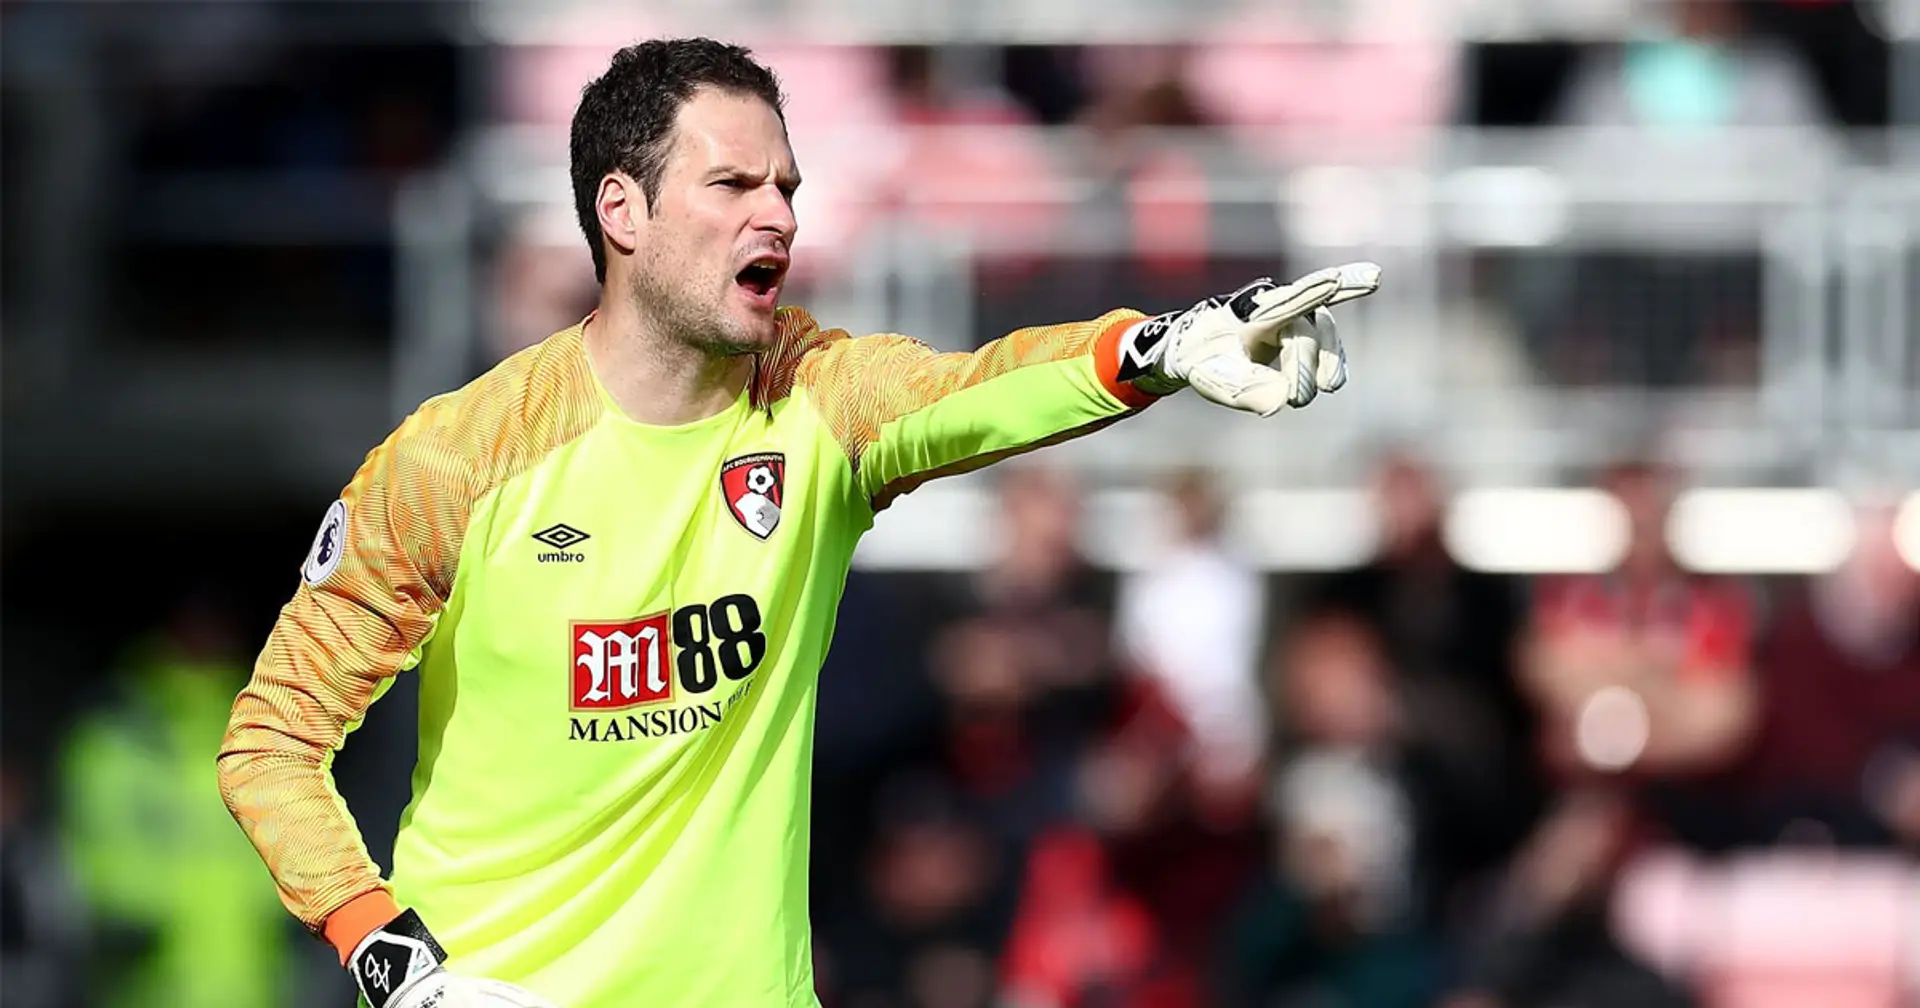 'There's only so much Netflix you can watch': Ex-Chelsea keeper Asmir Begovic admits to coronavirus lockdown in Italy